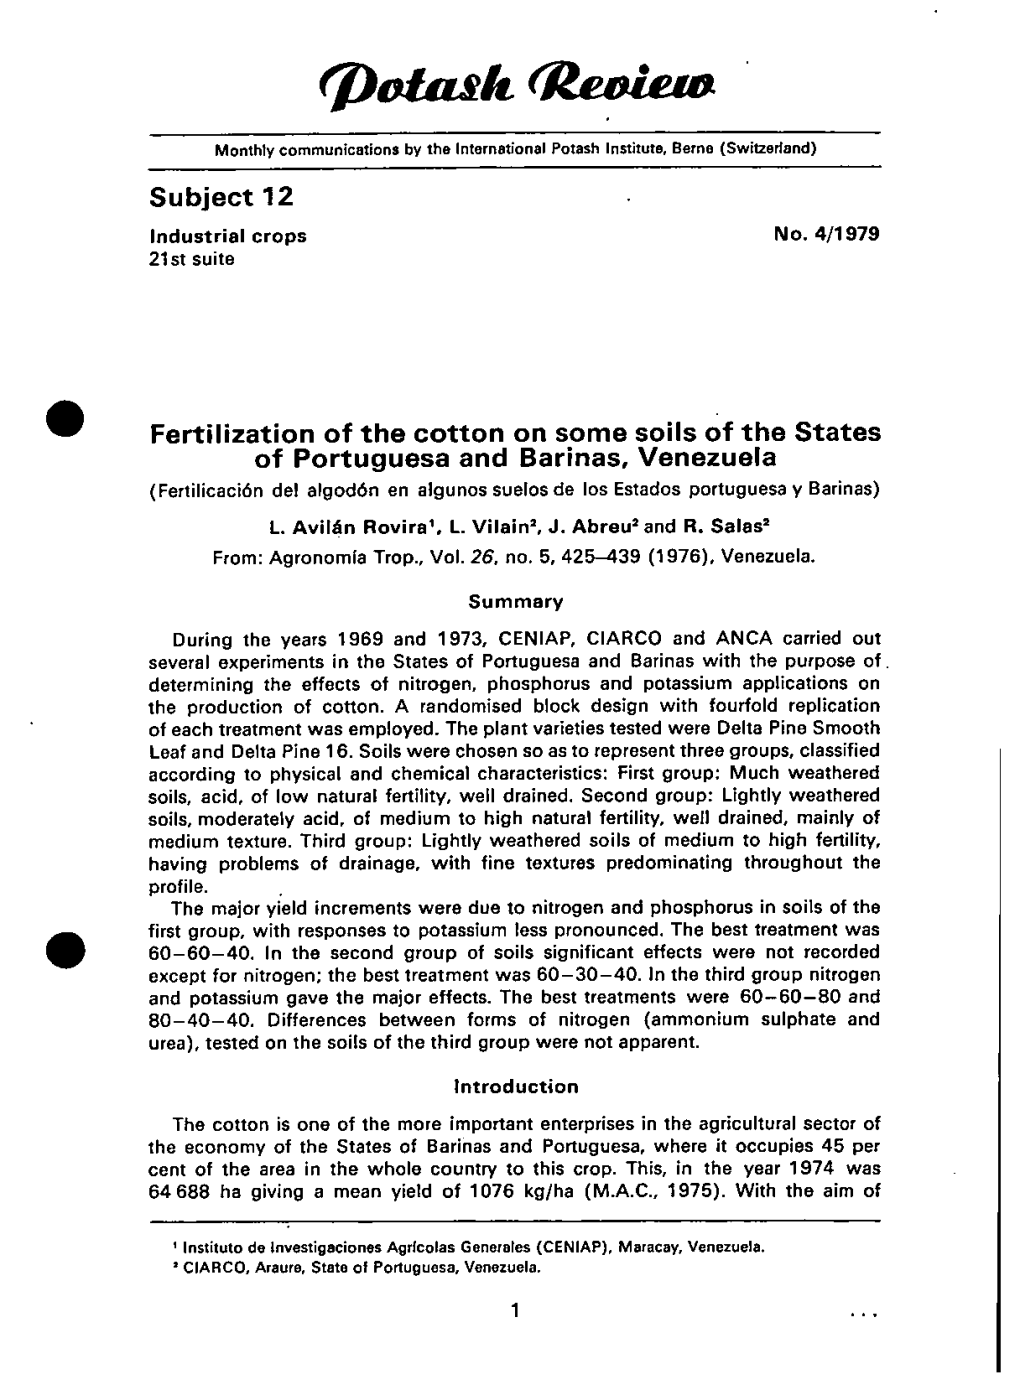 Subject 12 O Fertilization of the Cotton on Some Soils of the States Of